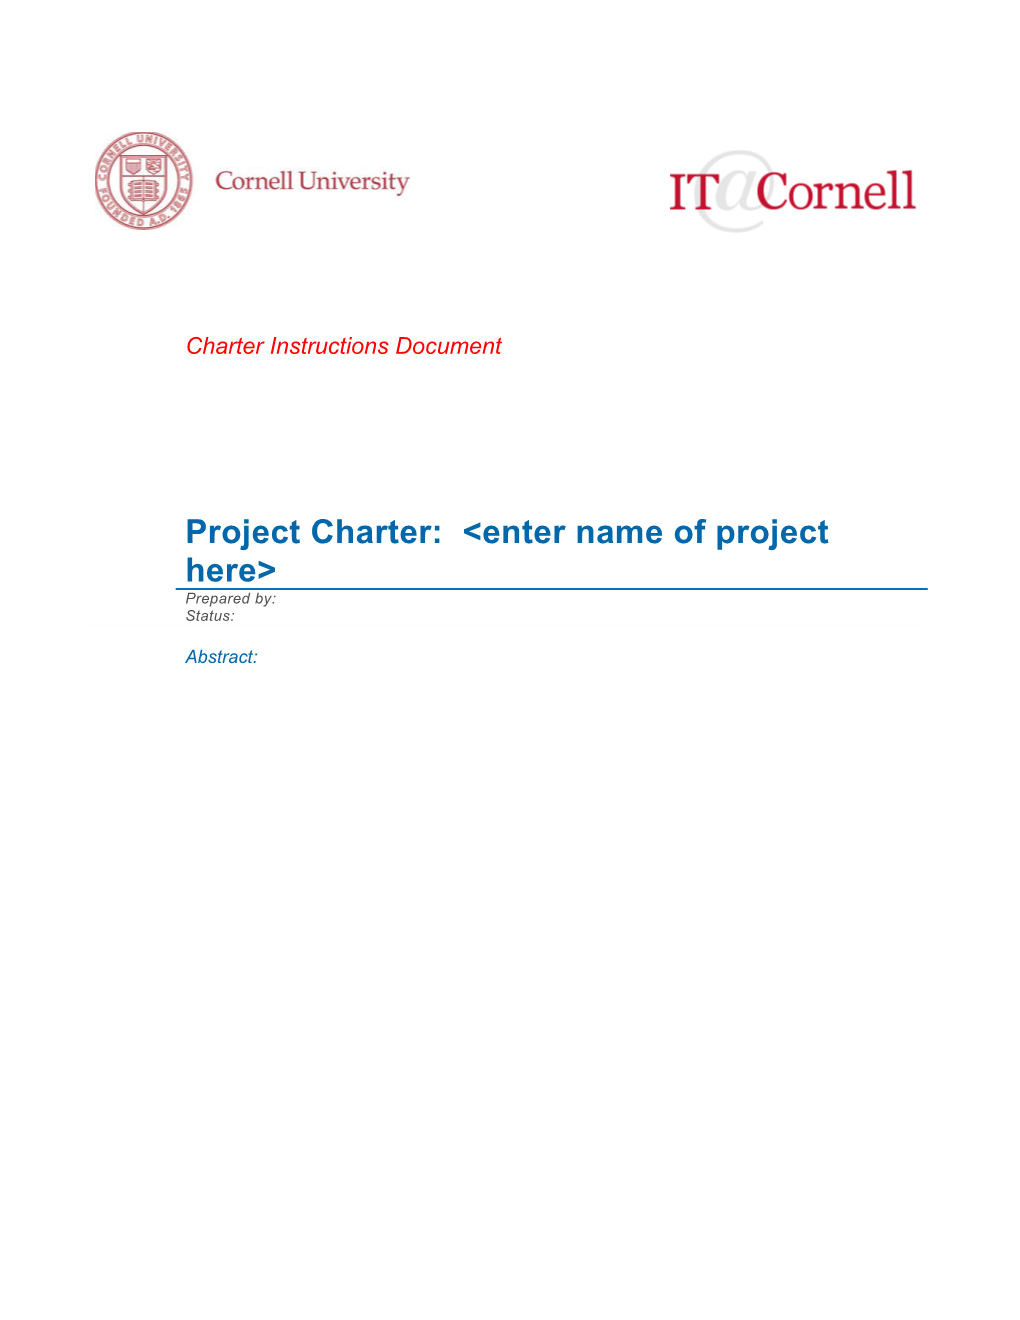 Project Charter: Enter Name of Project Here